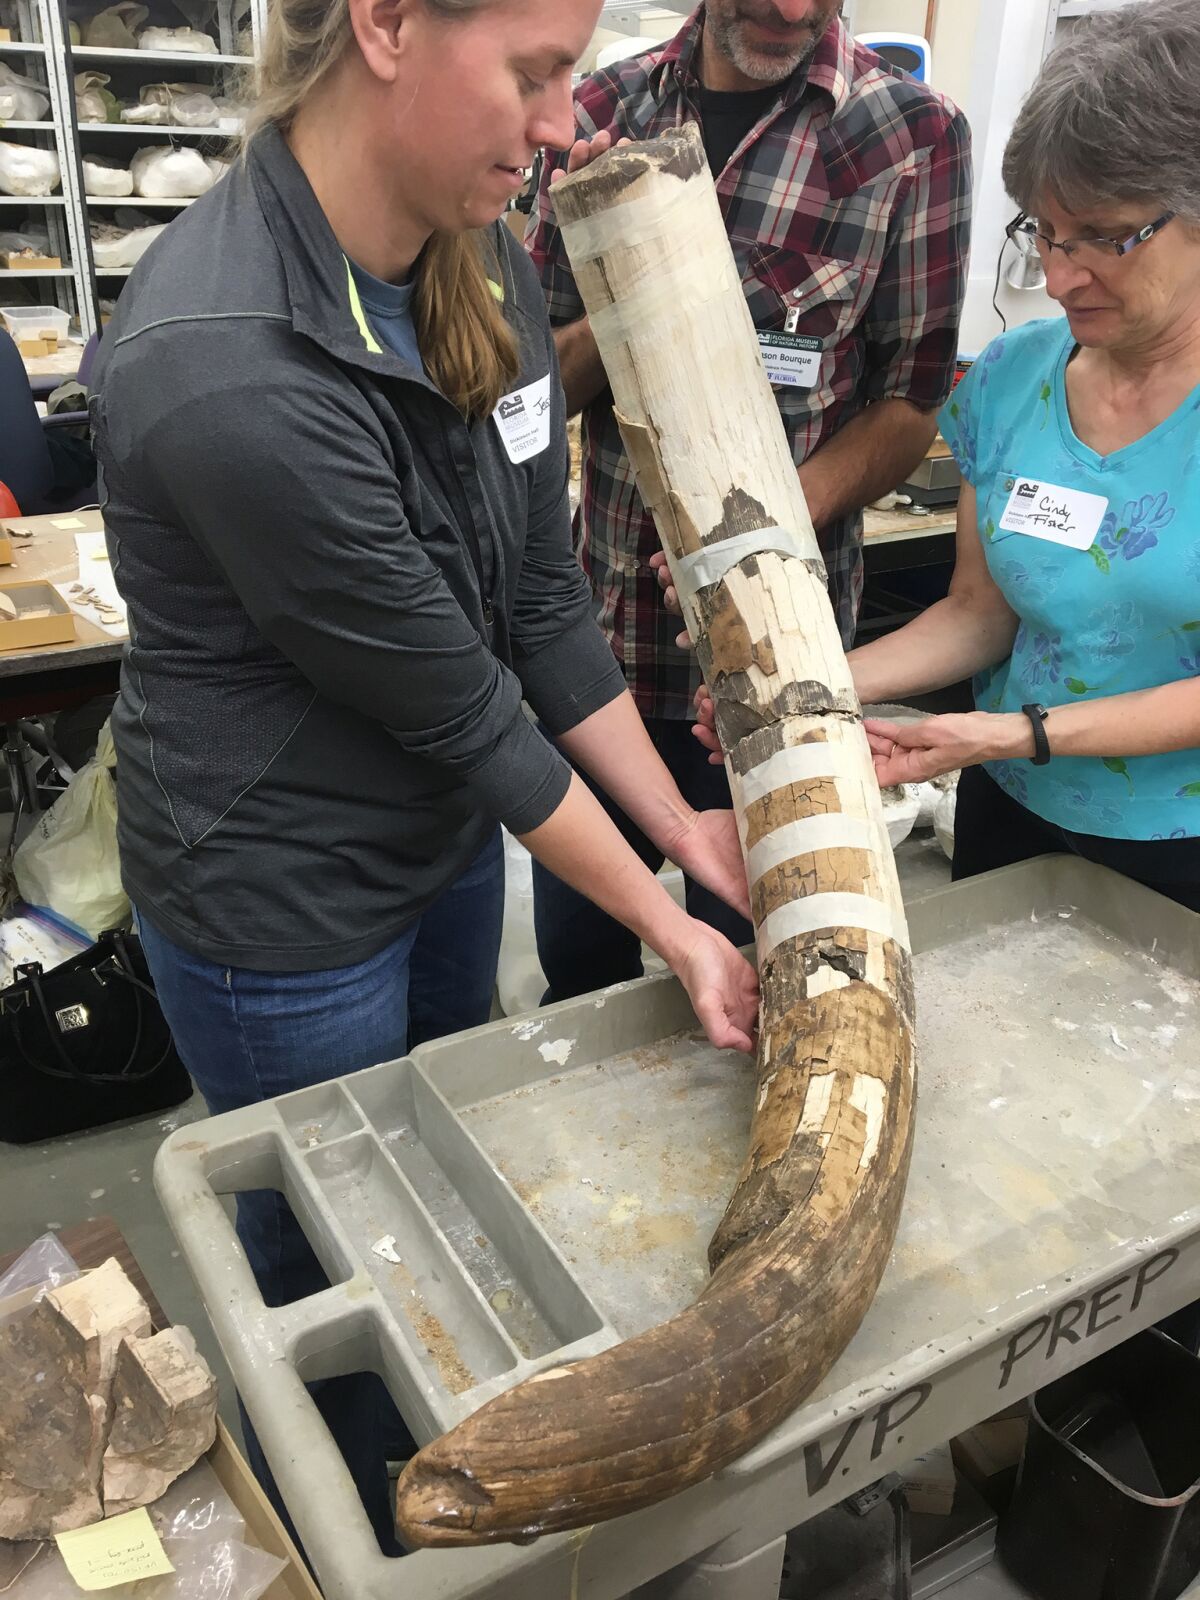 Researchers handle a Mastodon tusk from the Page-Ladson site. Its curvature is typical for an upper tusk from the left side. (DC Fisher / University of Michigan Museum of Paleontology)